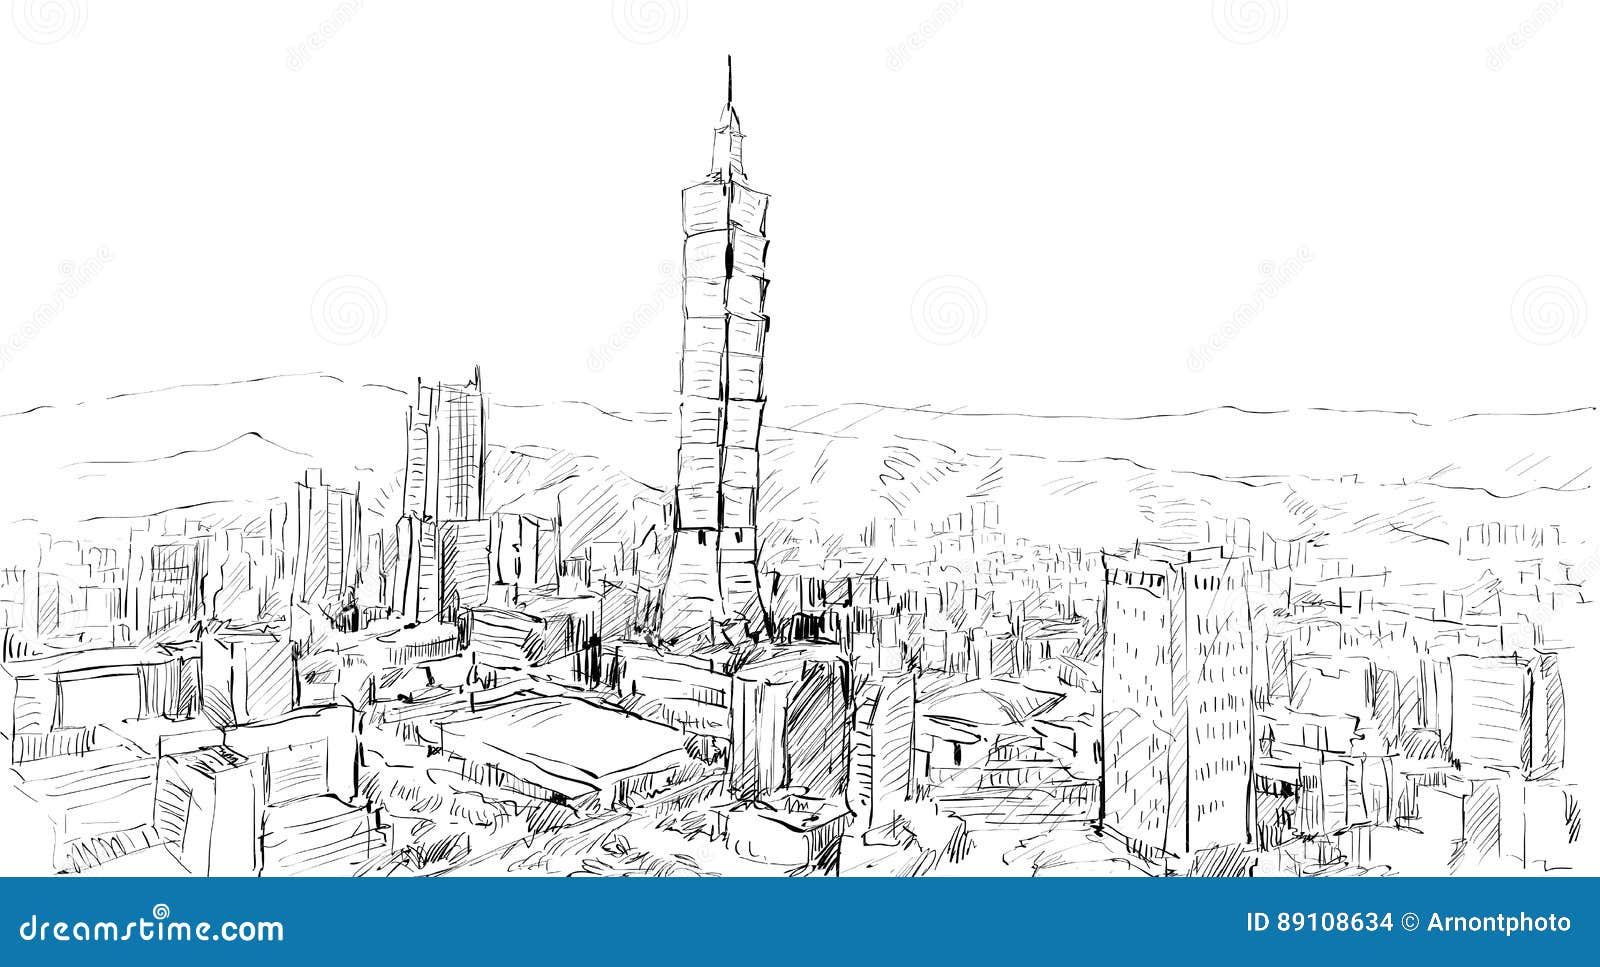 sketch of cityscape show townscape in taiwan, taipei building